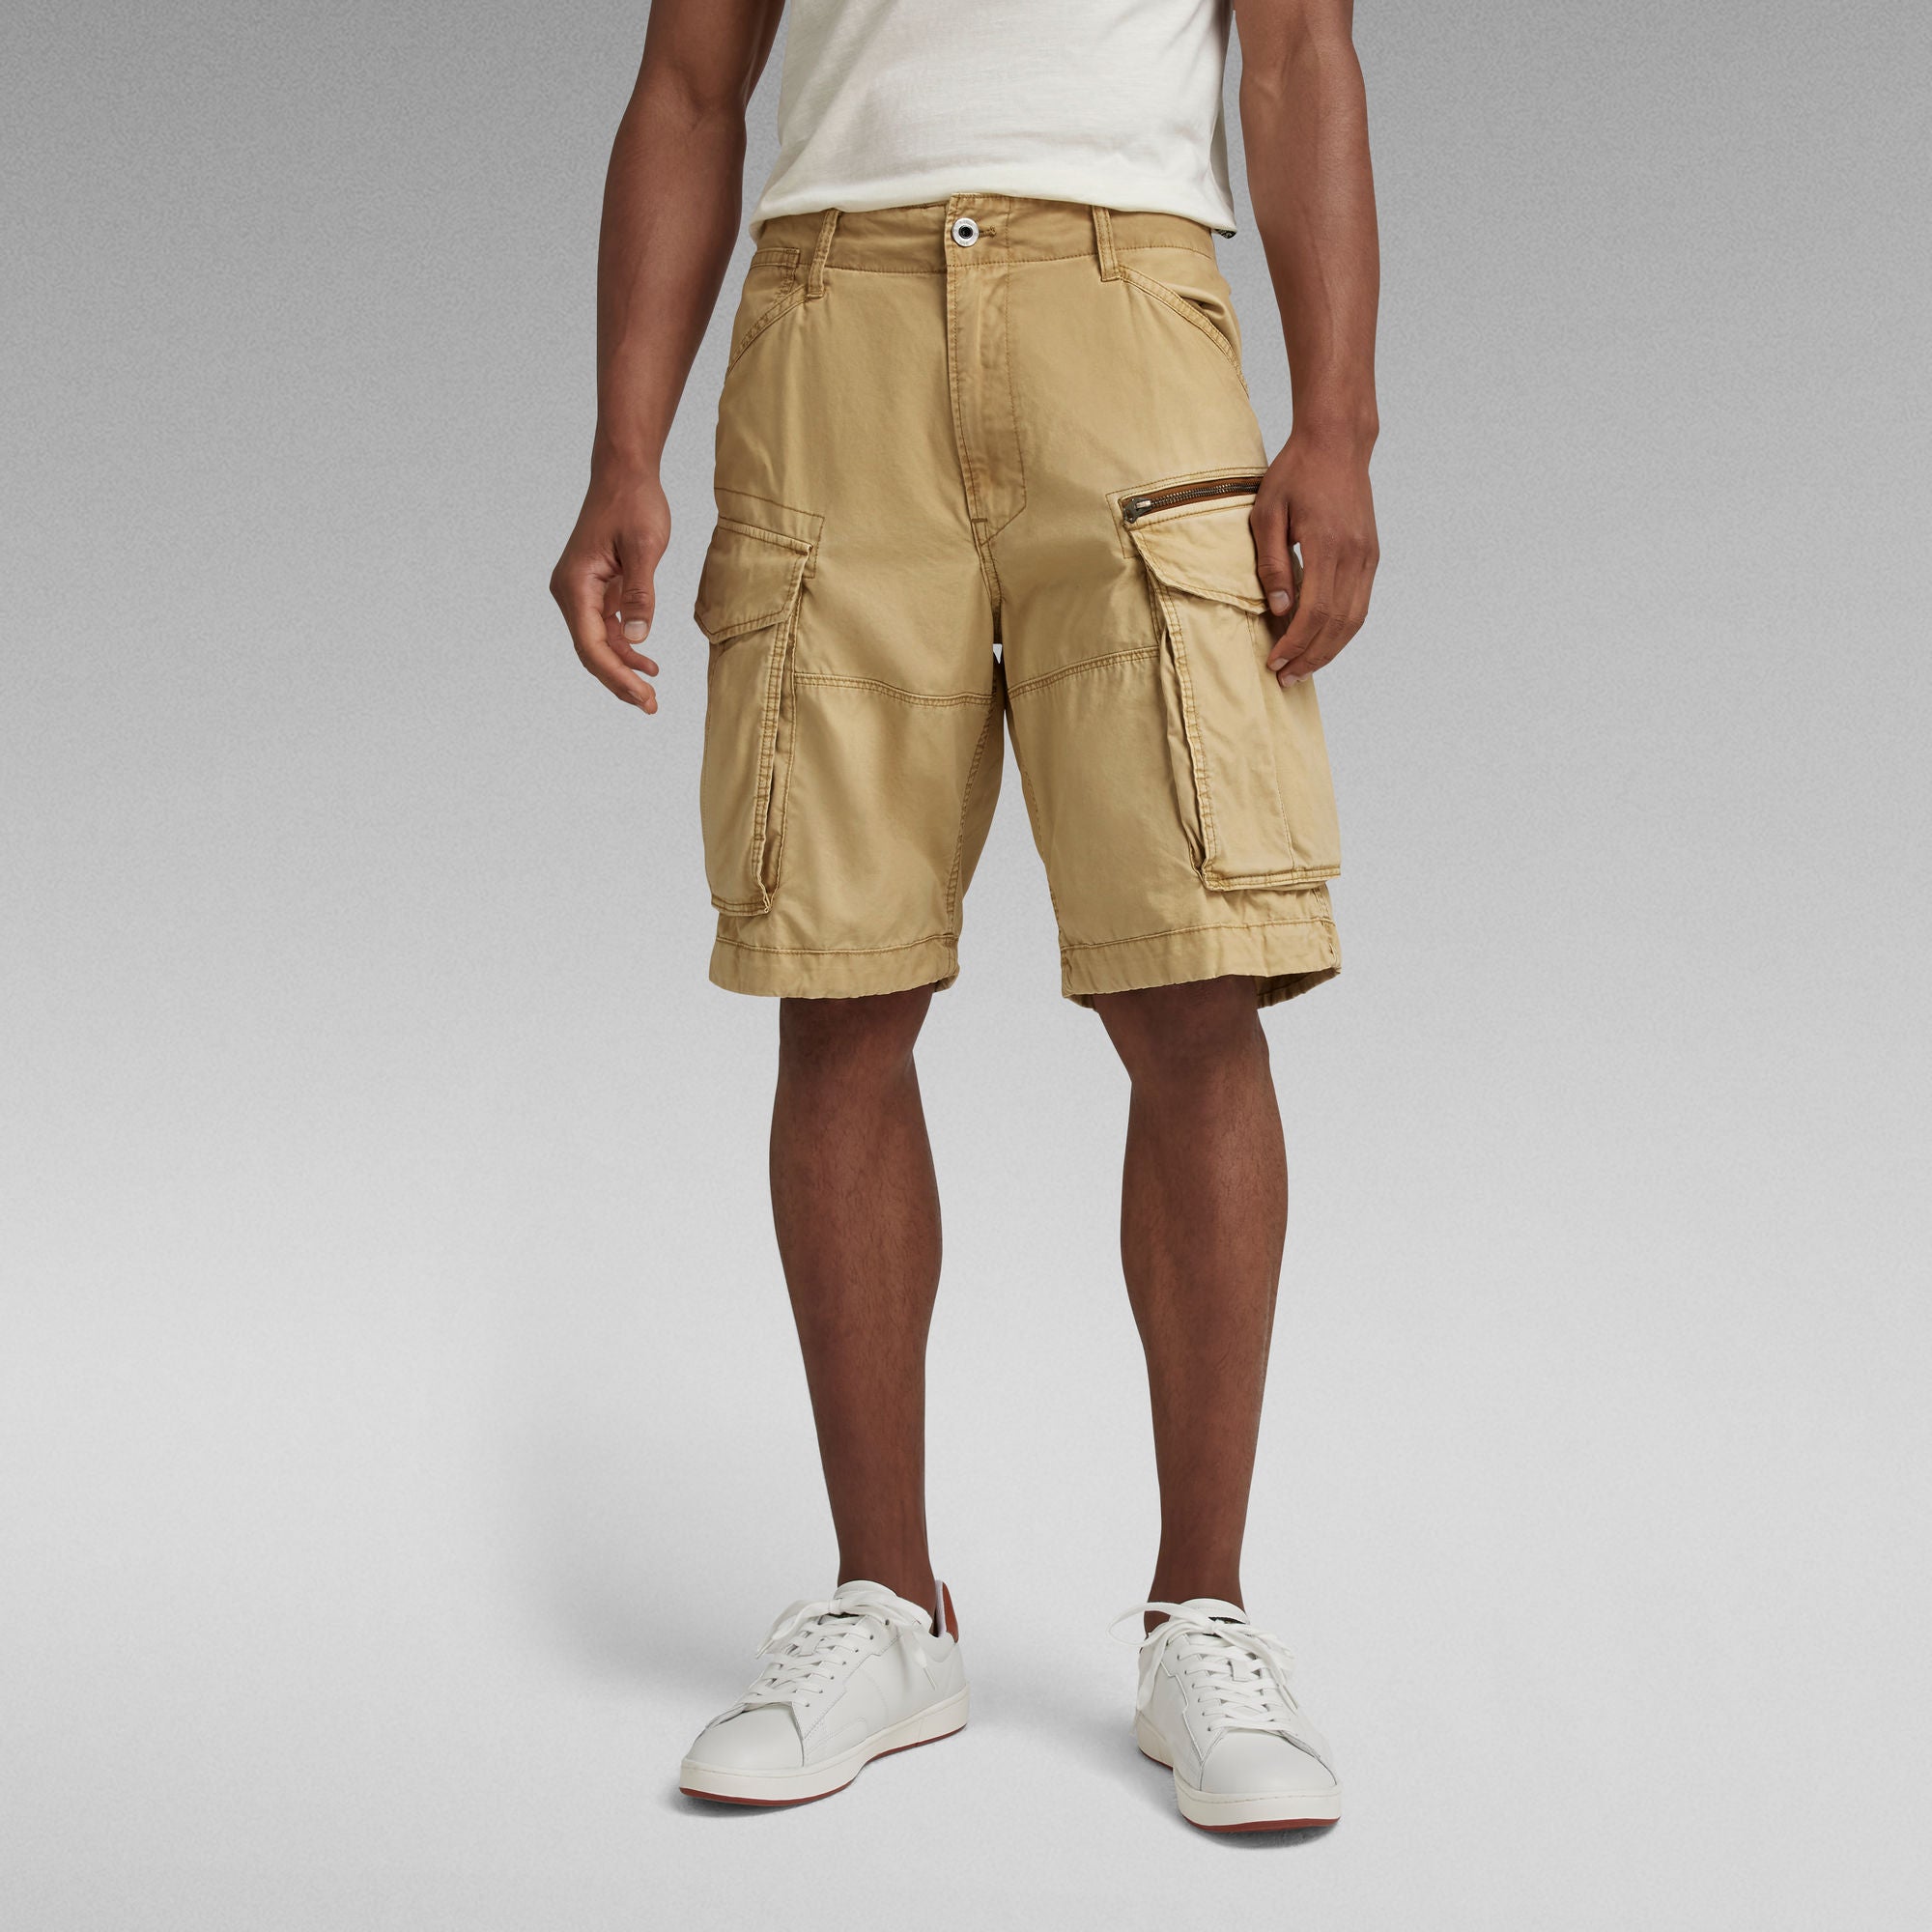 Buy G Star Raw Hemp Vintage Rovic Zip Cargo Short at In Style –  InStyle-Tuscaloosa